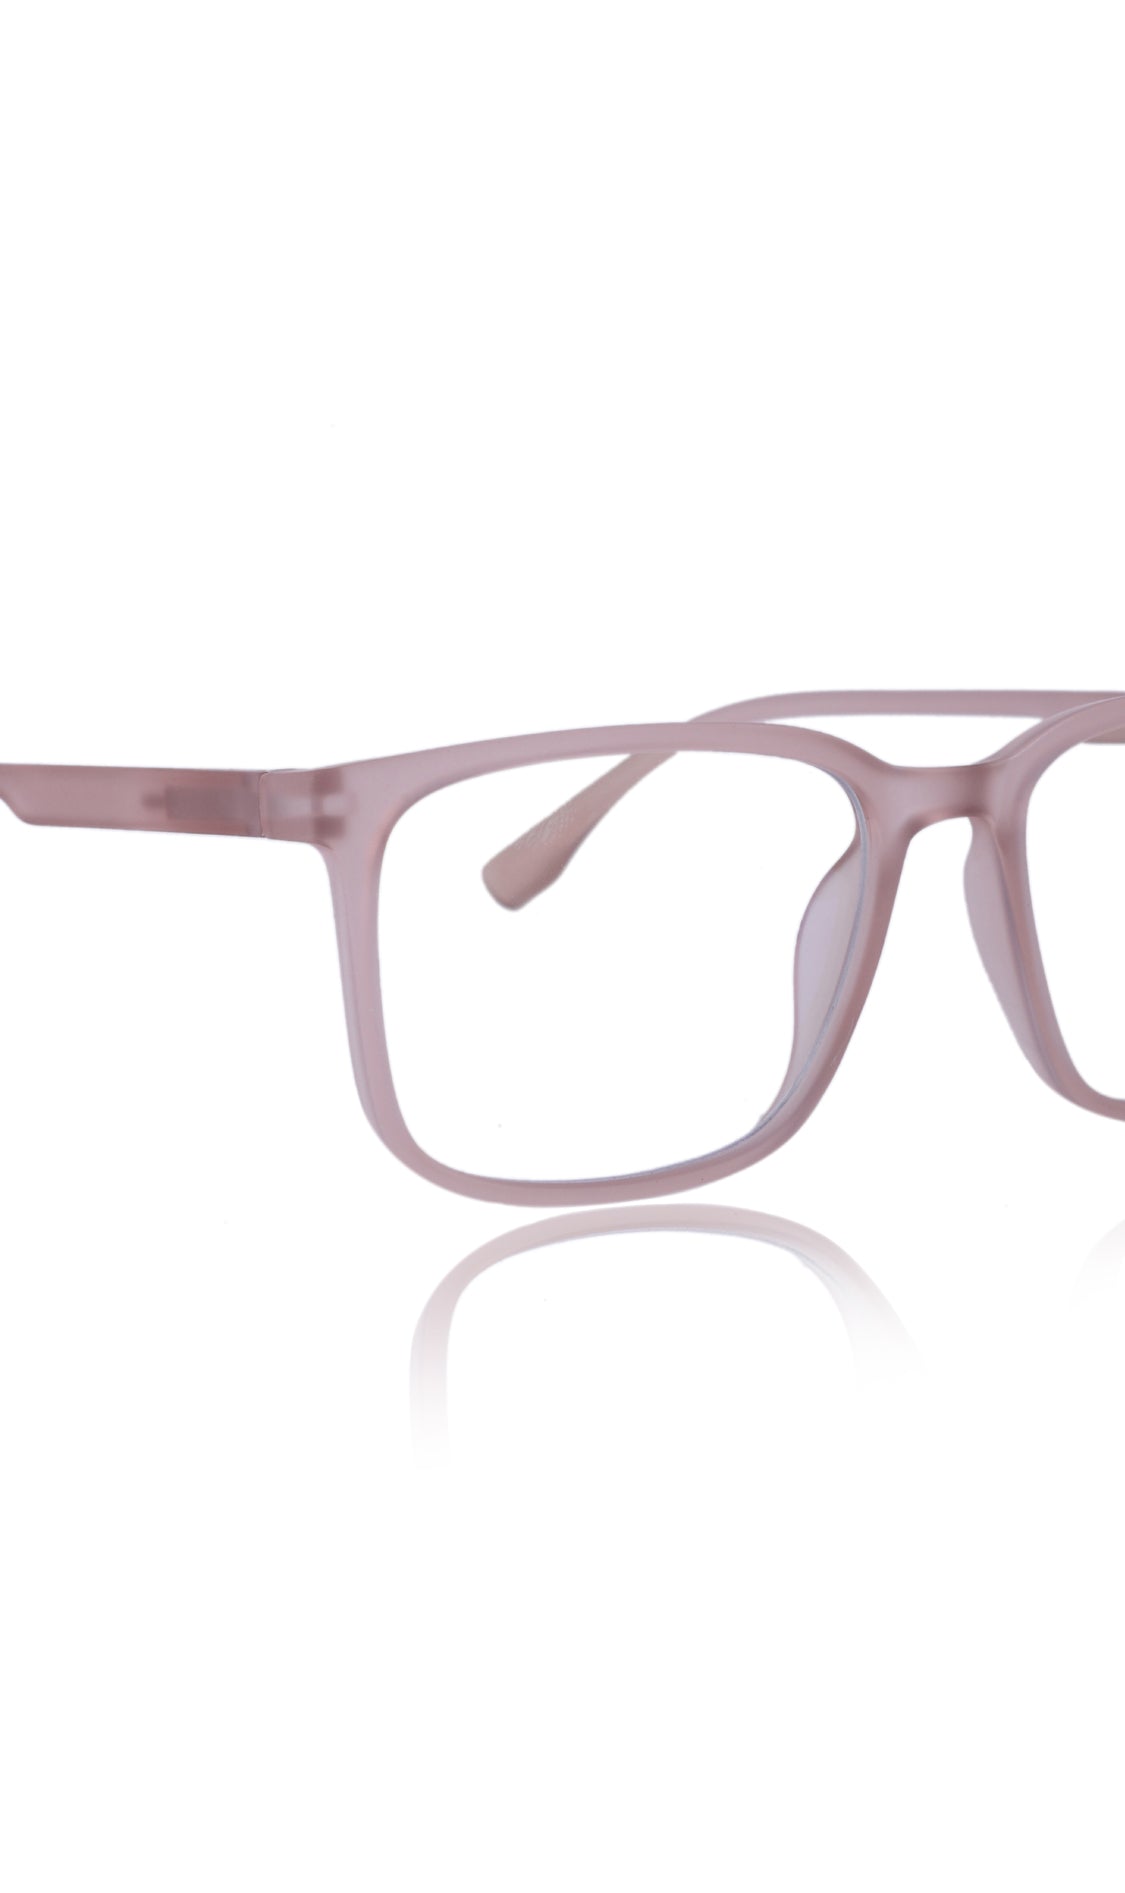 Jodykoes® Colour Series : Vibrant colours eyewear rectangle frames with anti glare and blue filter eyeglasses for men and women (Peach Rose)